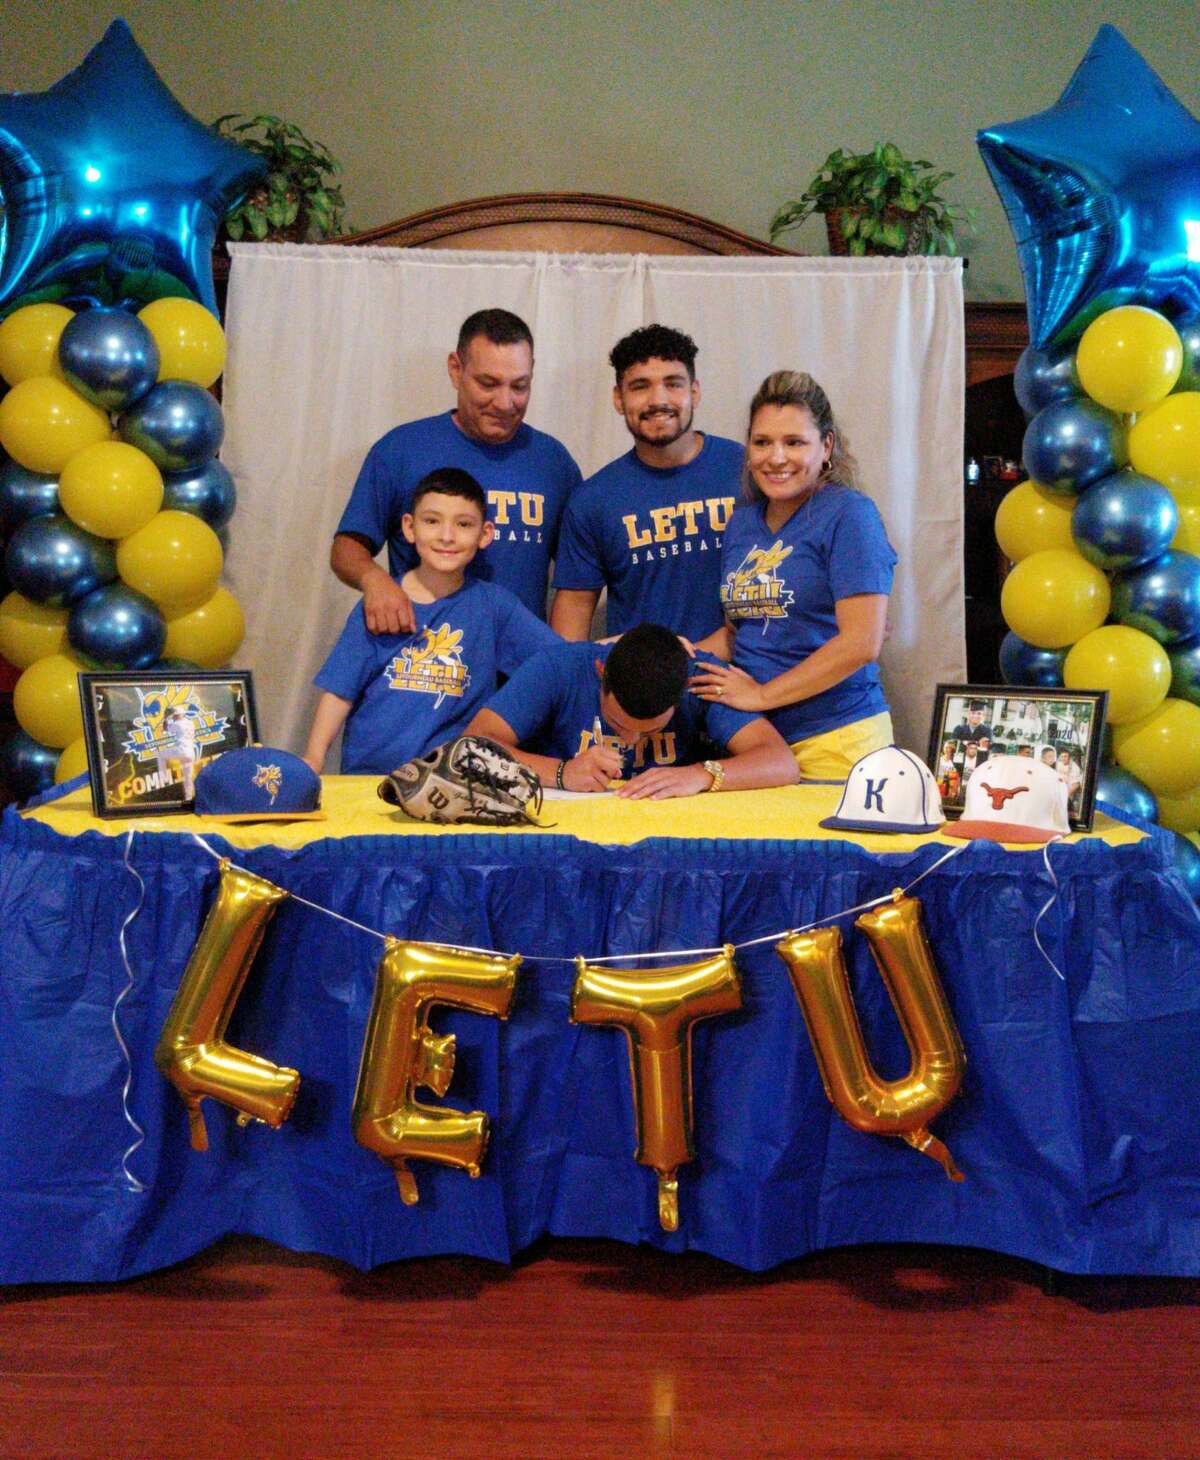 After enduring 16 surgeries, this Dobie High School star athlete, Gabriel Rojas, has emerged strong to recently clinch a prized baseball scholarship at Letourneau University in Longview for Fall 2020.